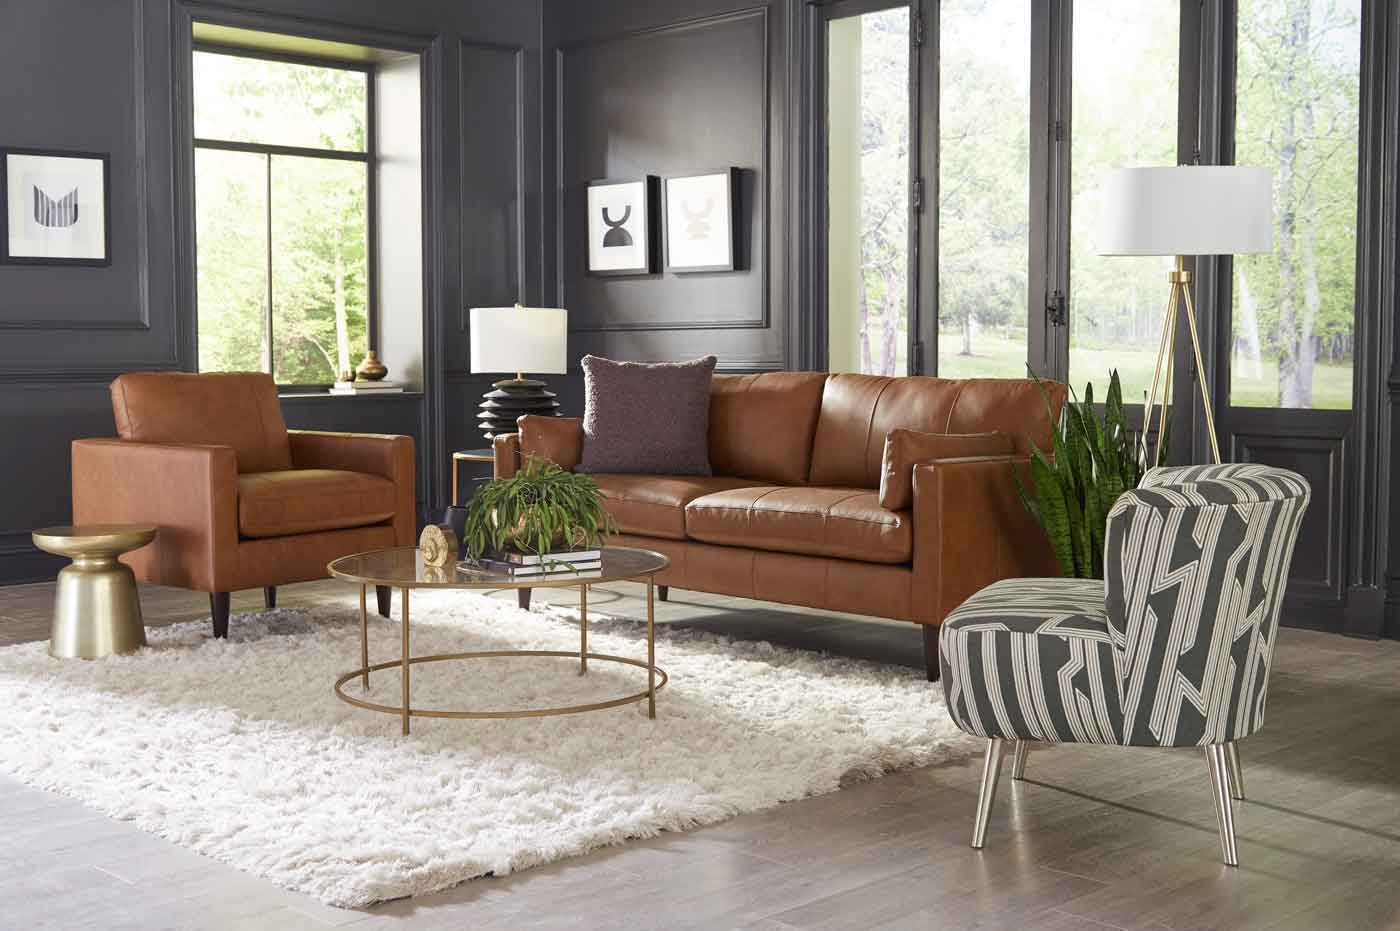 The Trafton Living Room Collection Product Review 